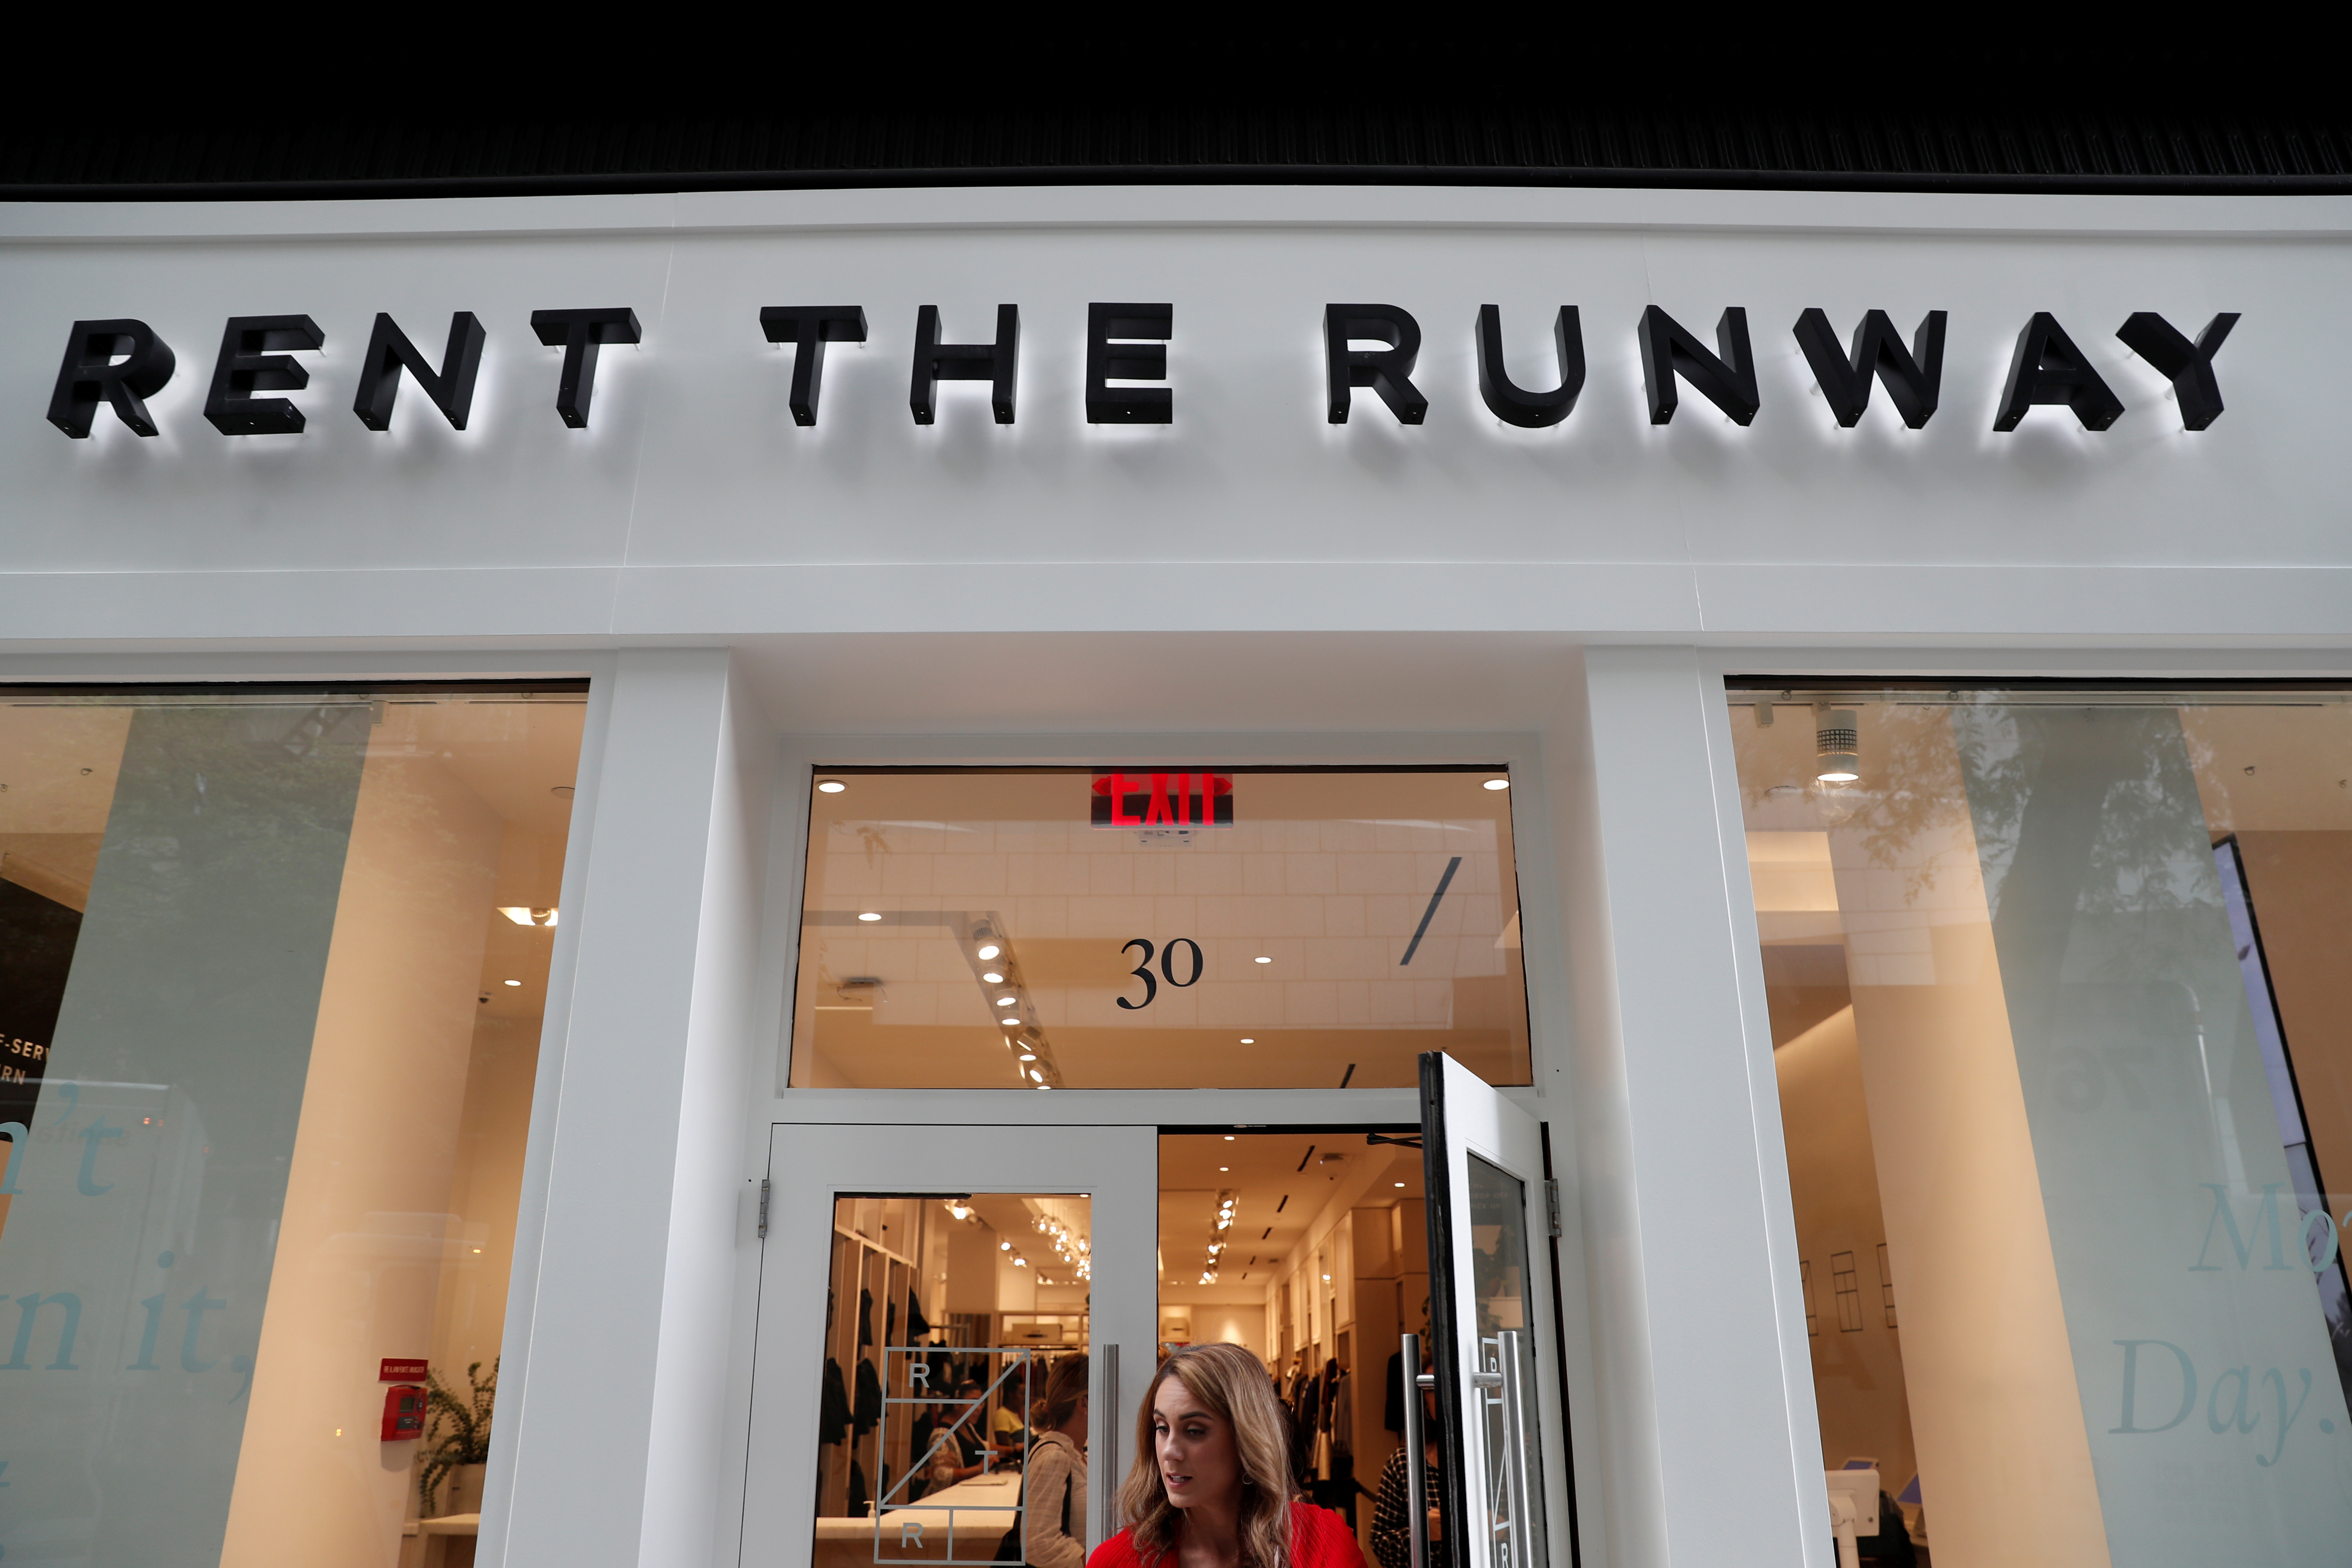 The Rent The Runway store, an online subscription service for women to rent designer dress and accessory items, is seen in New York City